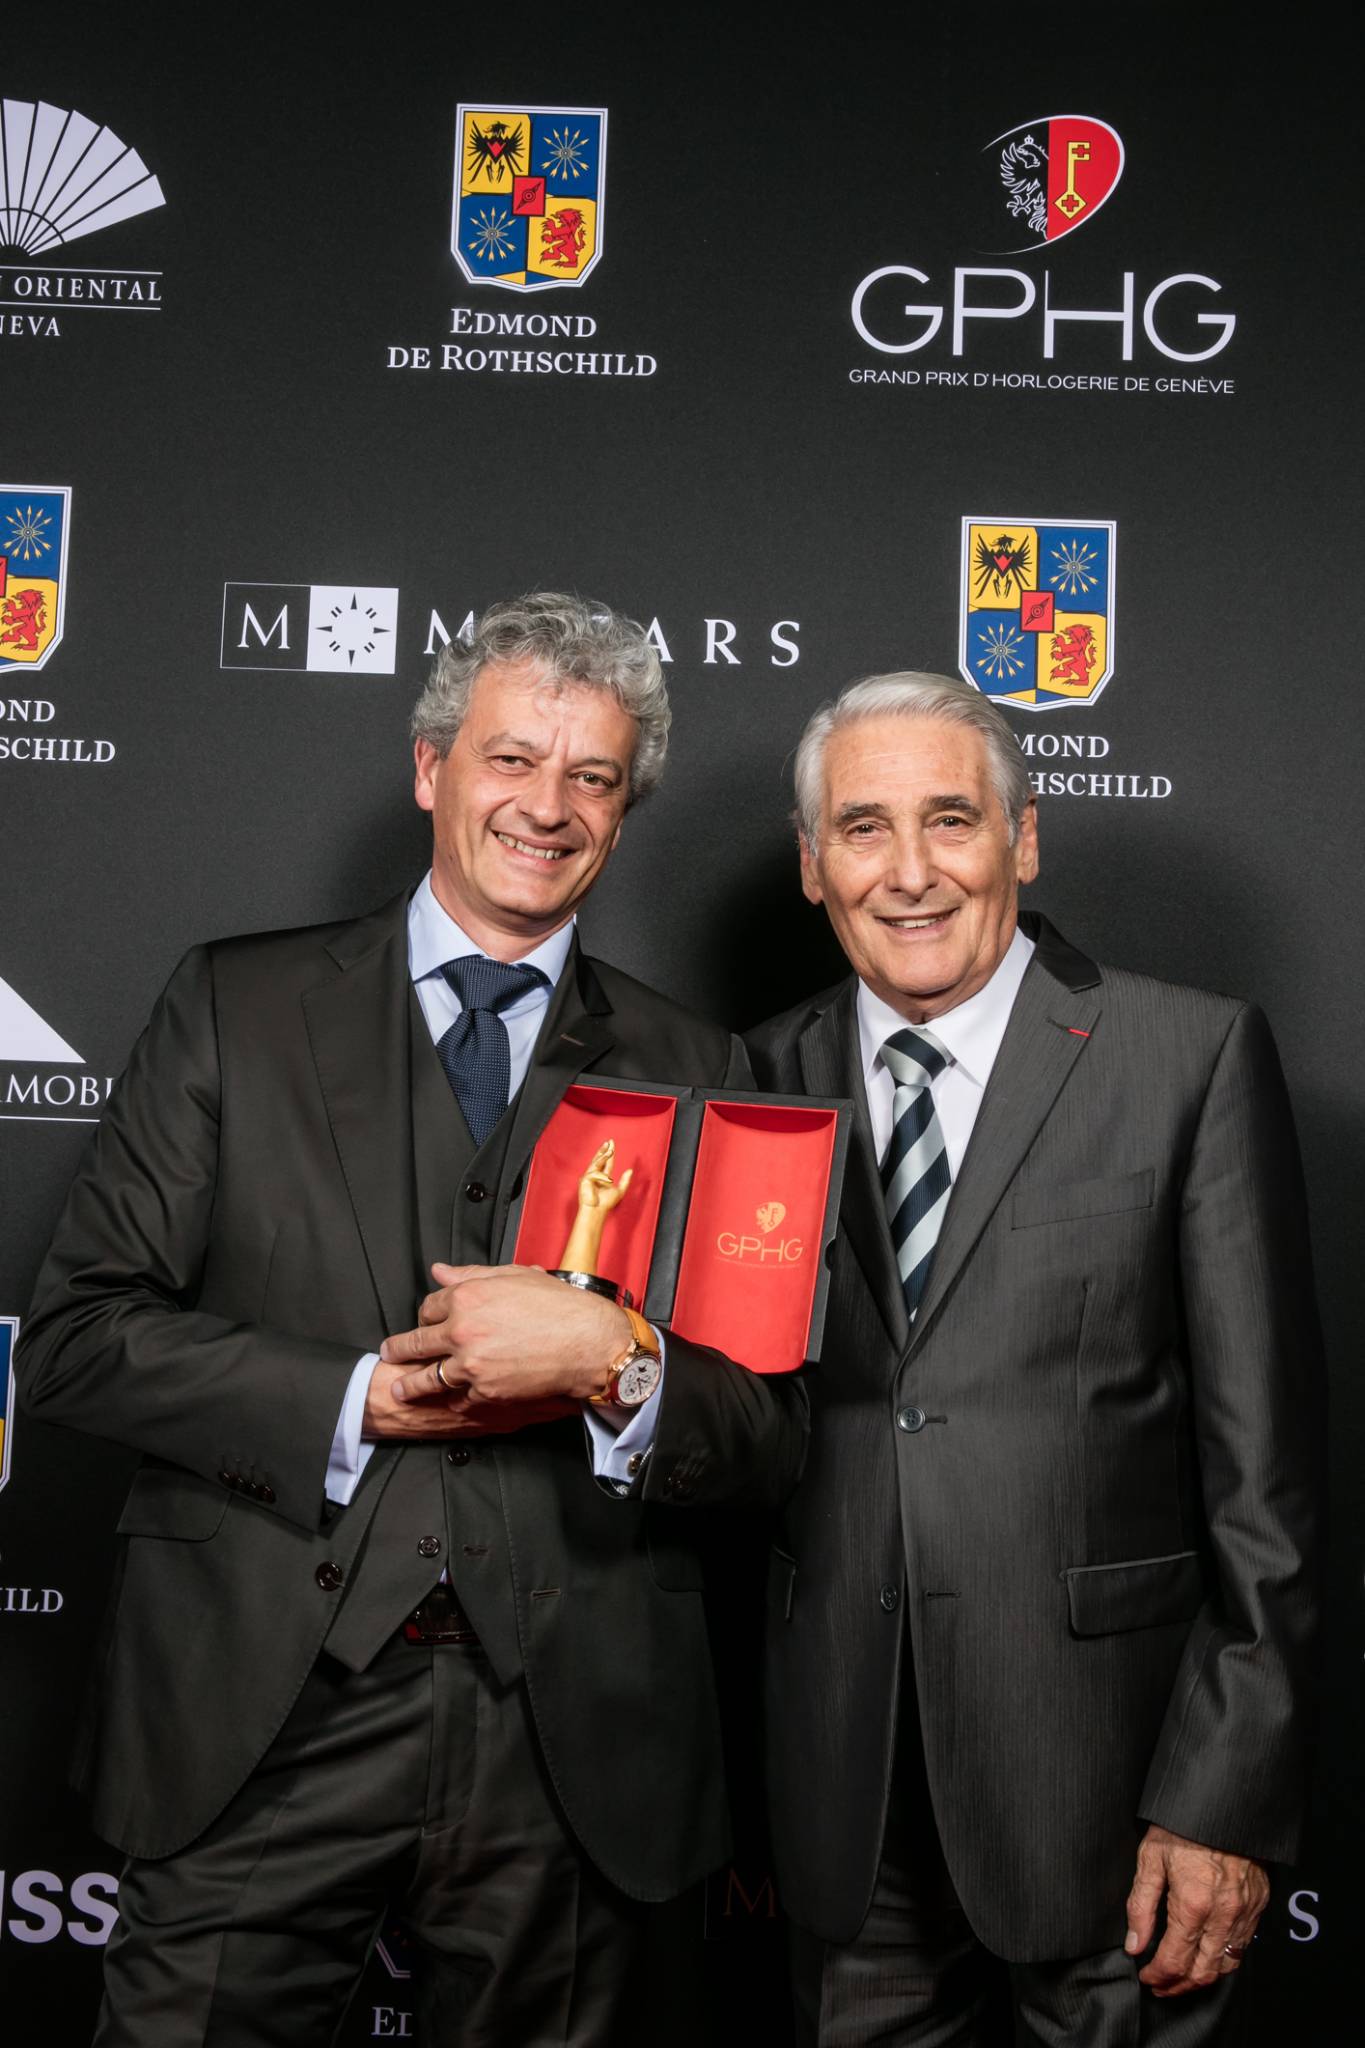 Lionel a Marca (Vice President, Head of Technical and Development Management de Blancpain, winner of the Artistic Crafts Watch Prize 2015) with Carlo Lamprecht (President of the Foundation of the GPHG)